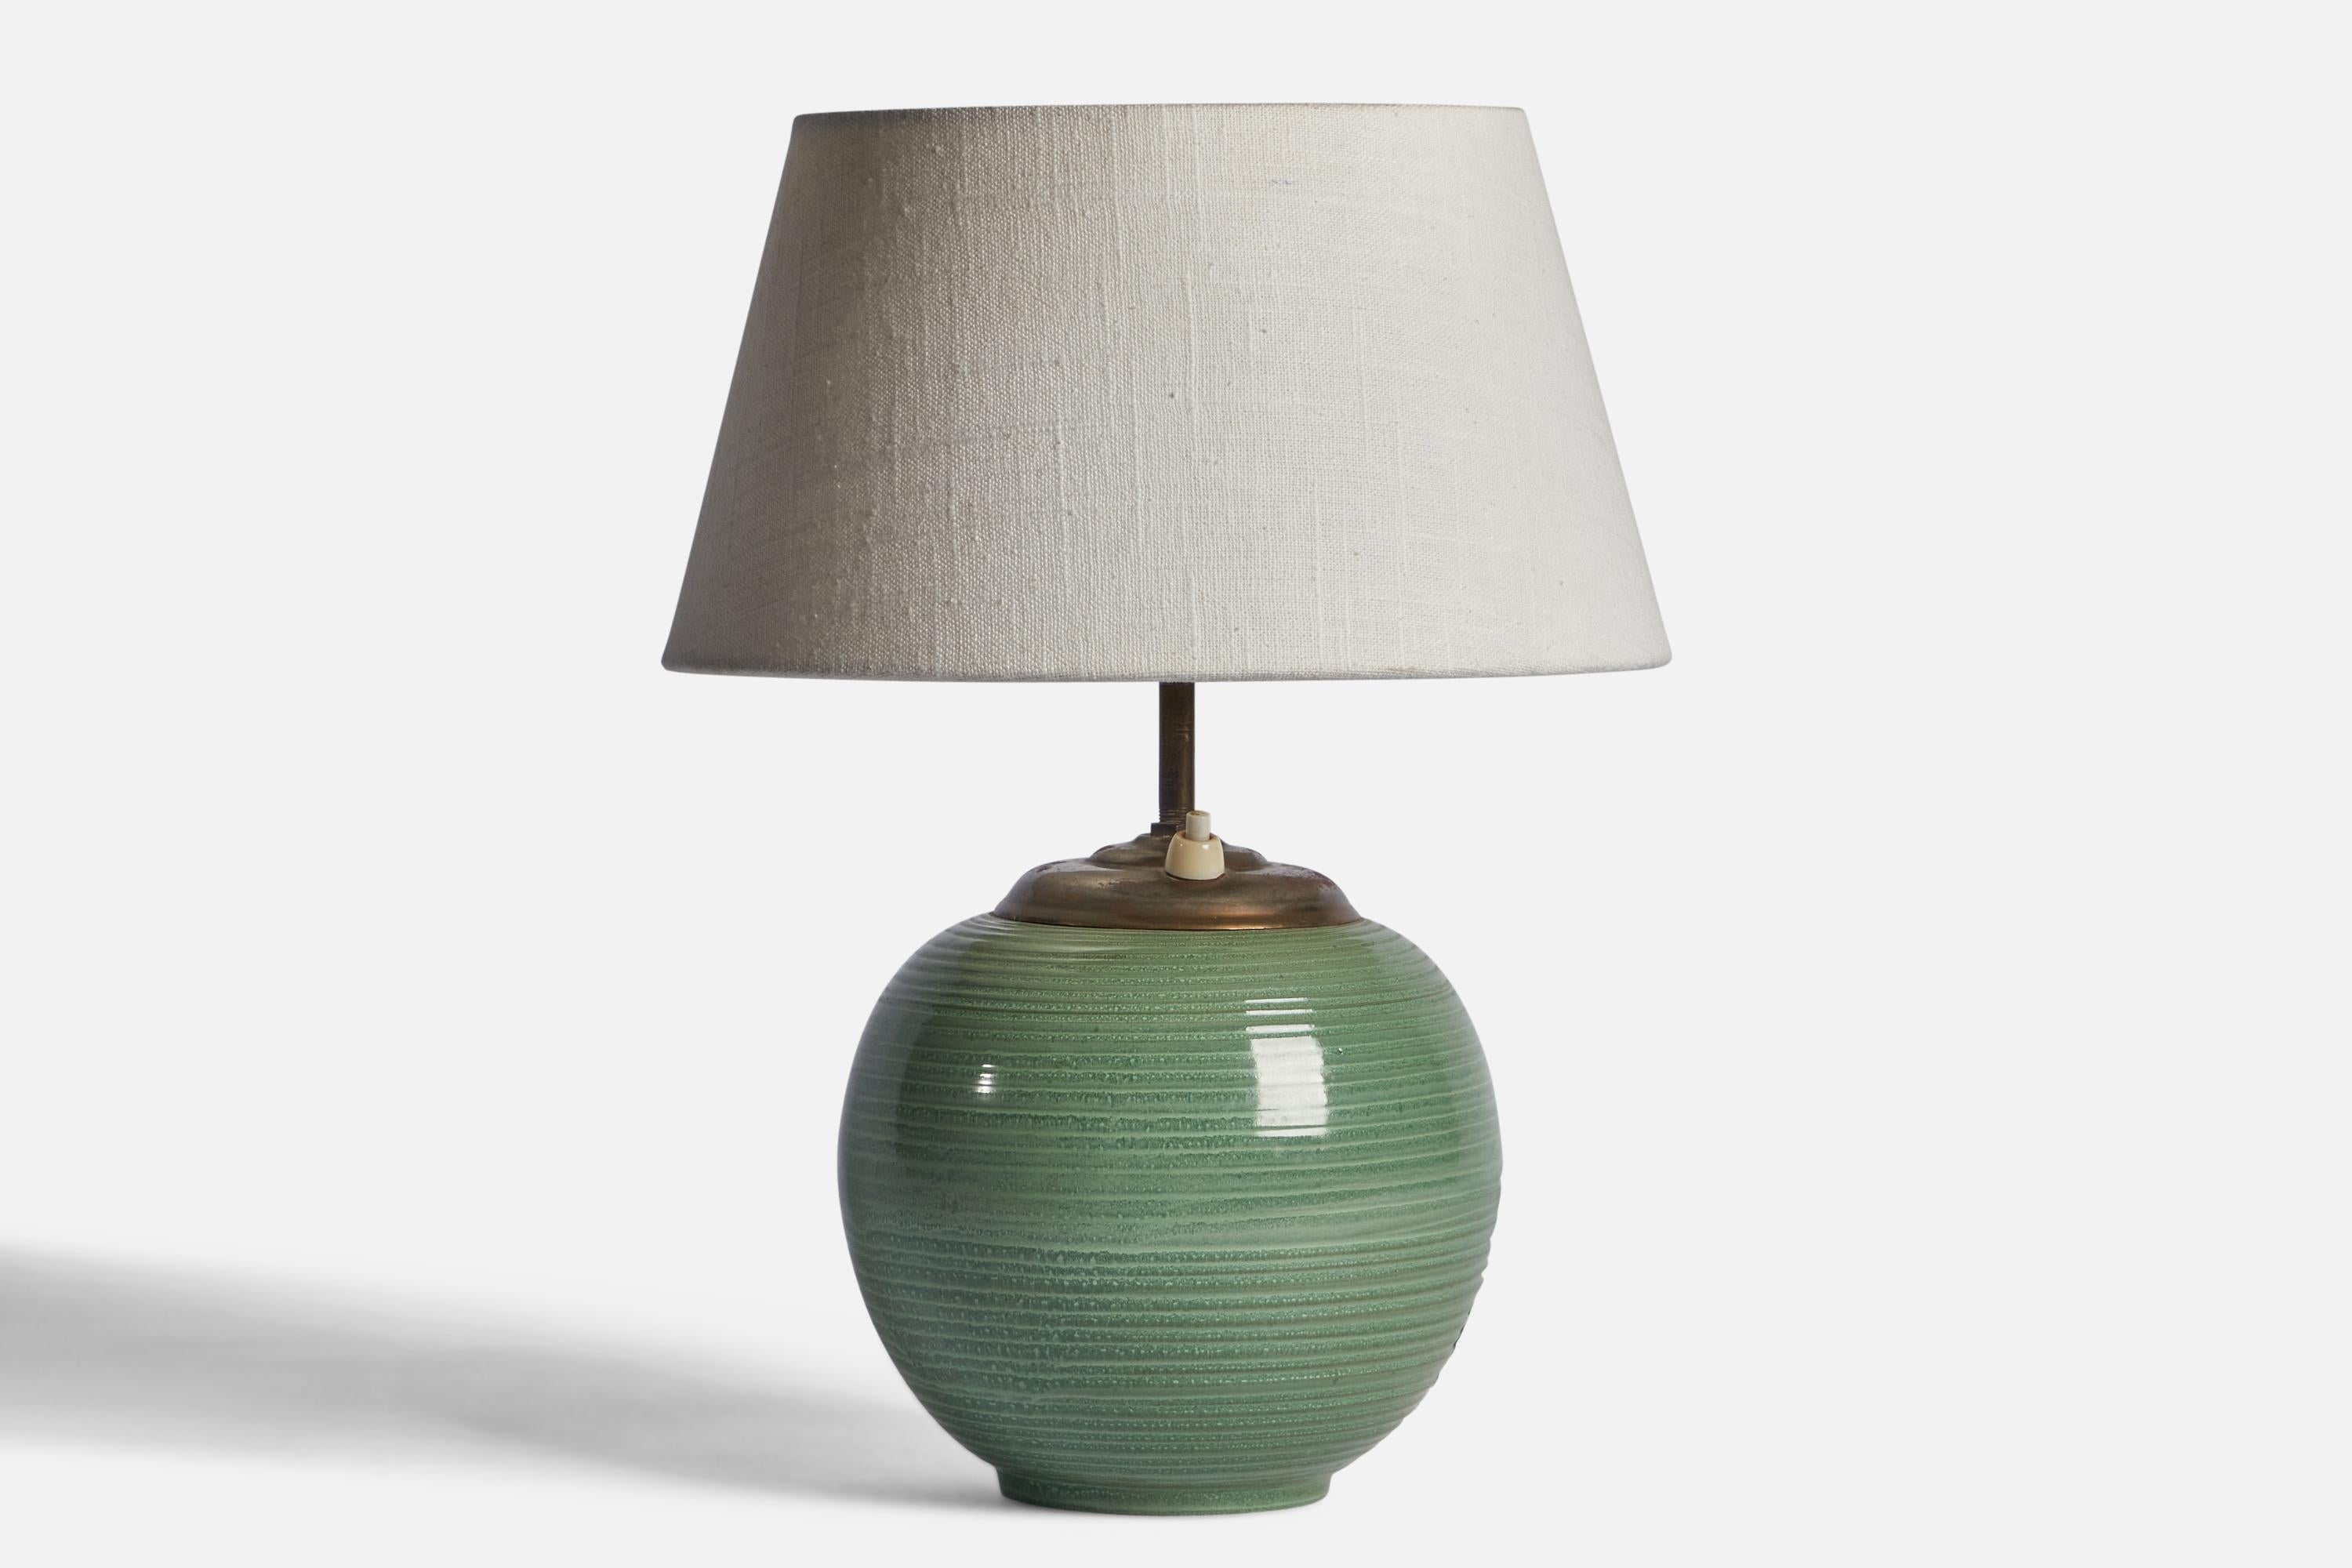 A green-glazed incised earthenware and brass table lamp designed and produced by Upsala Ekeby, Sweden, 1930s.

Dimensions of Lamp (inches): 11” H x 6.25” Diameter
Dimensions of Shade (inches): 7” Top Diameter x 10” Bottom Diameter x